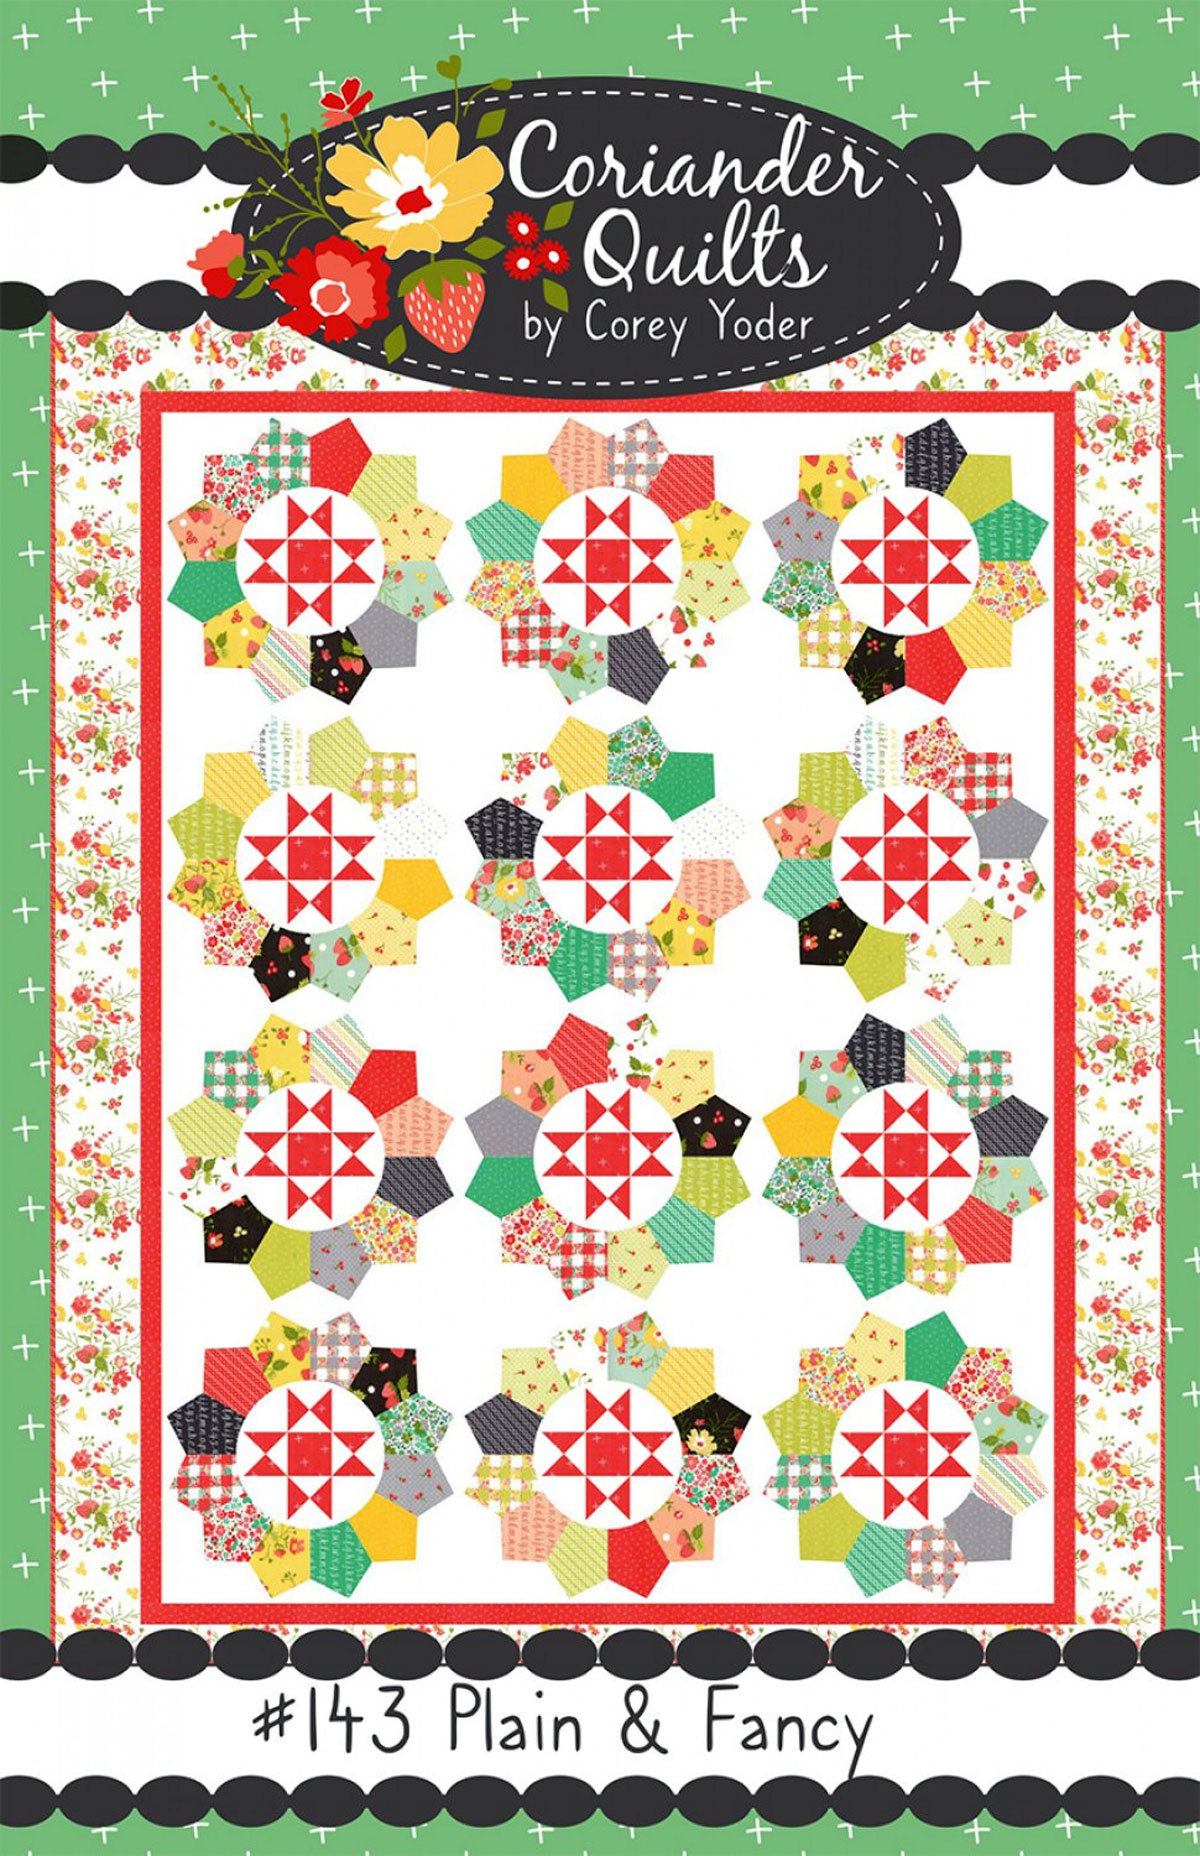 Plain-and-Fancy-quilt-sewing-pattern-Coriander-Quilts-front